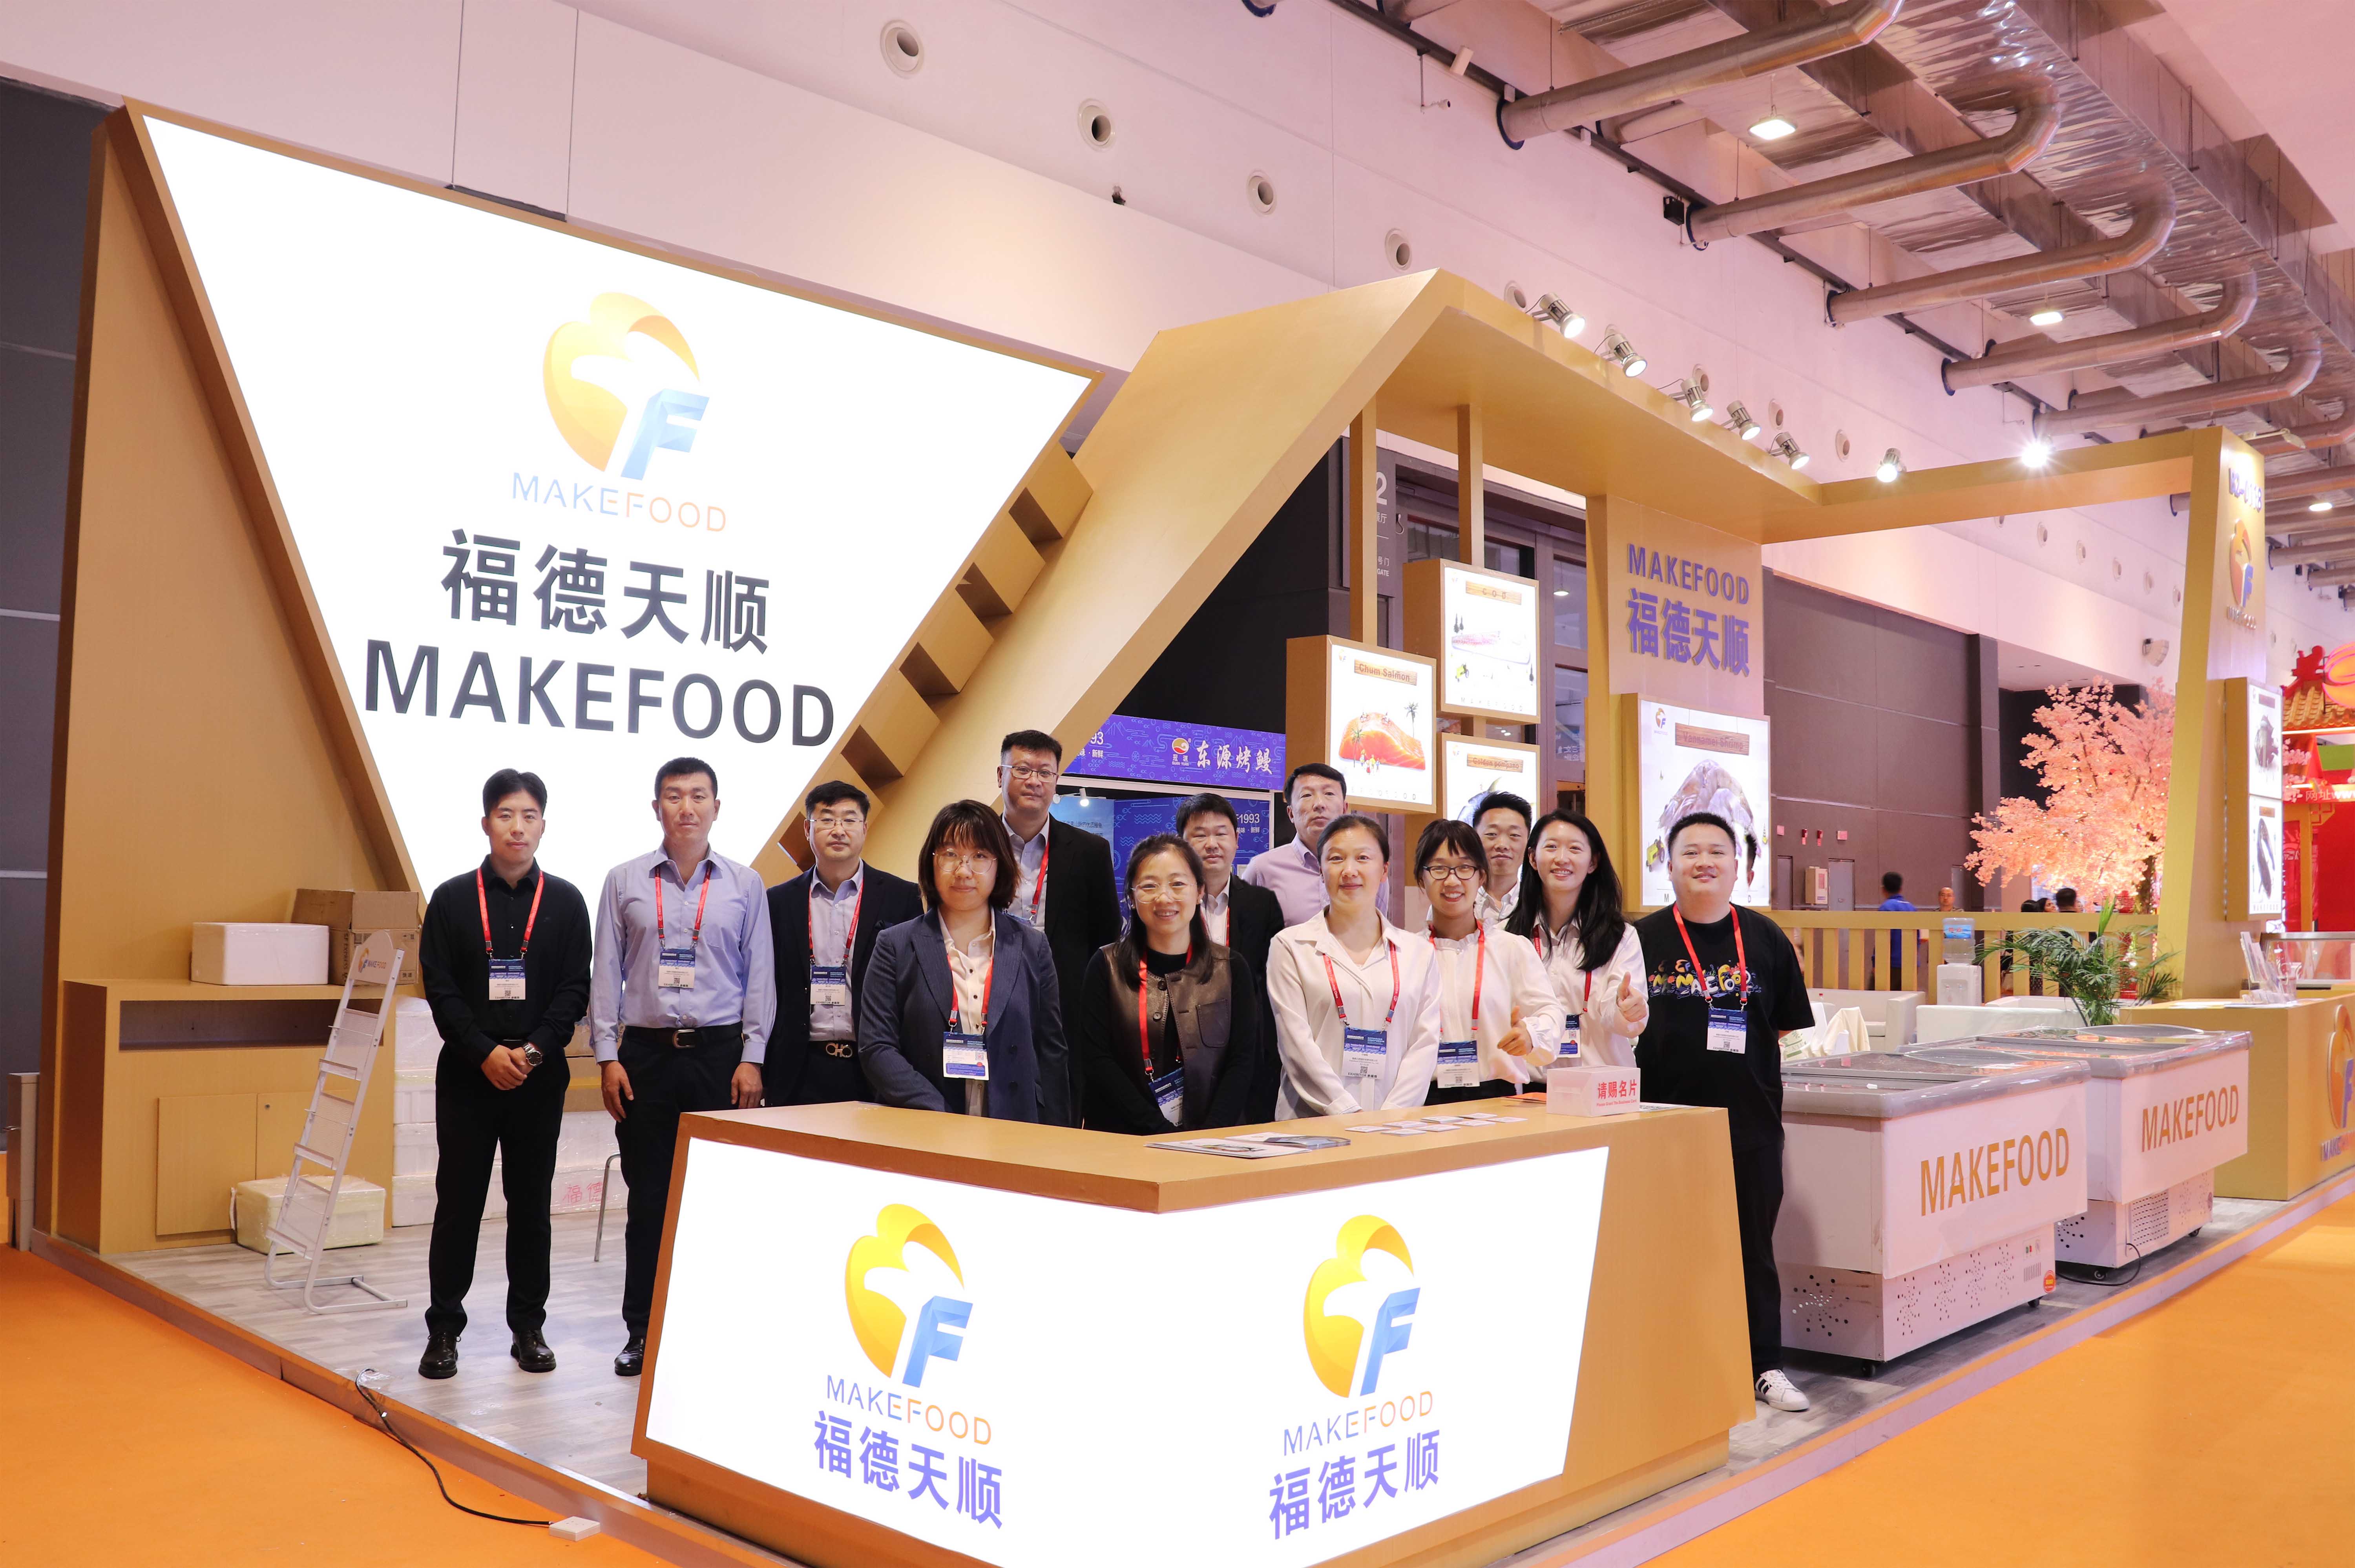 MAKEFOOD made a wonderful appearance at the Qingdao